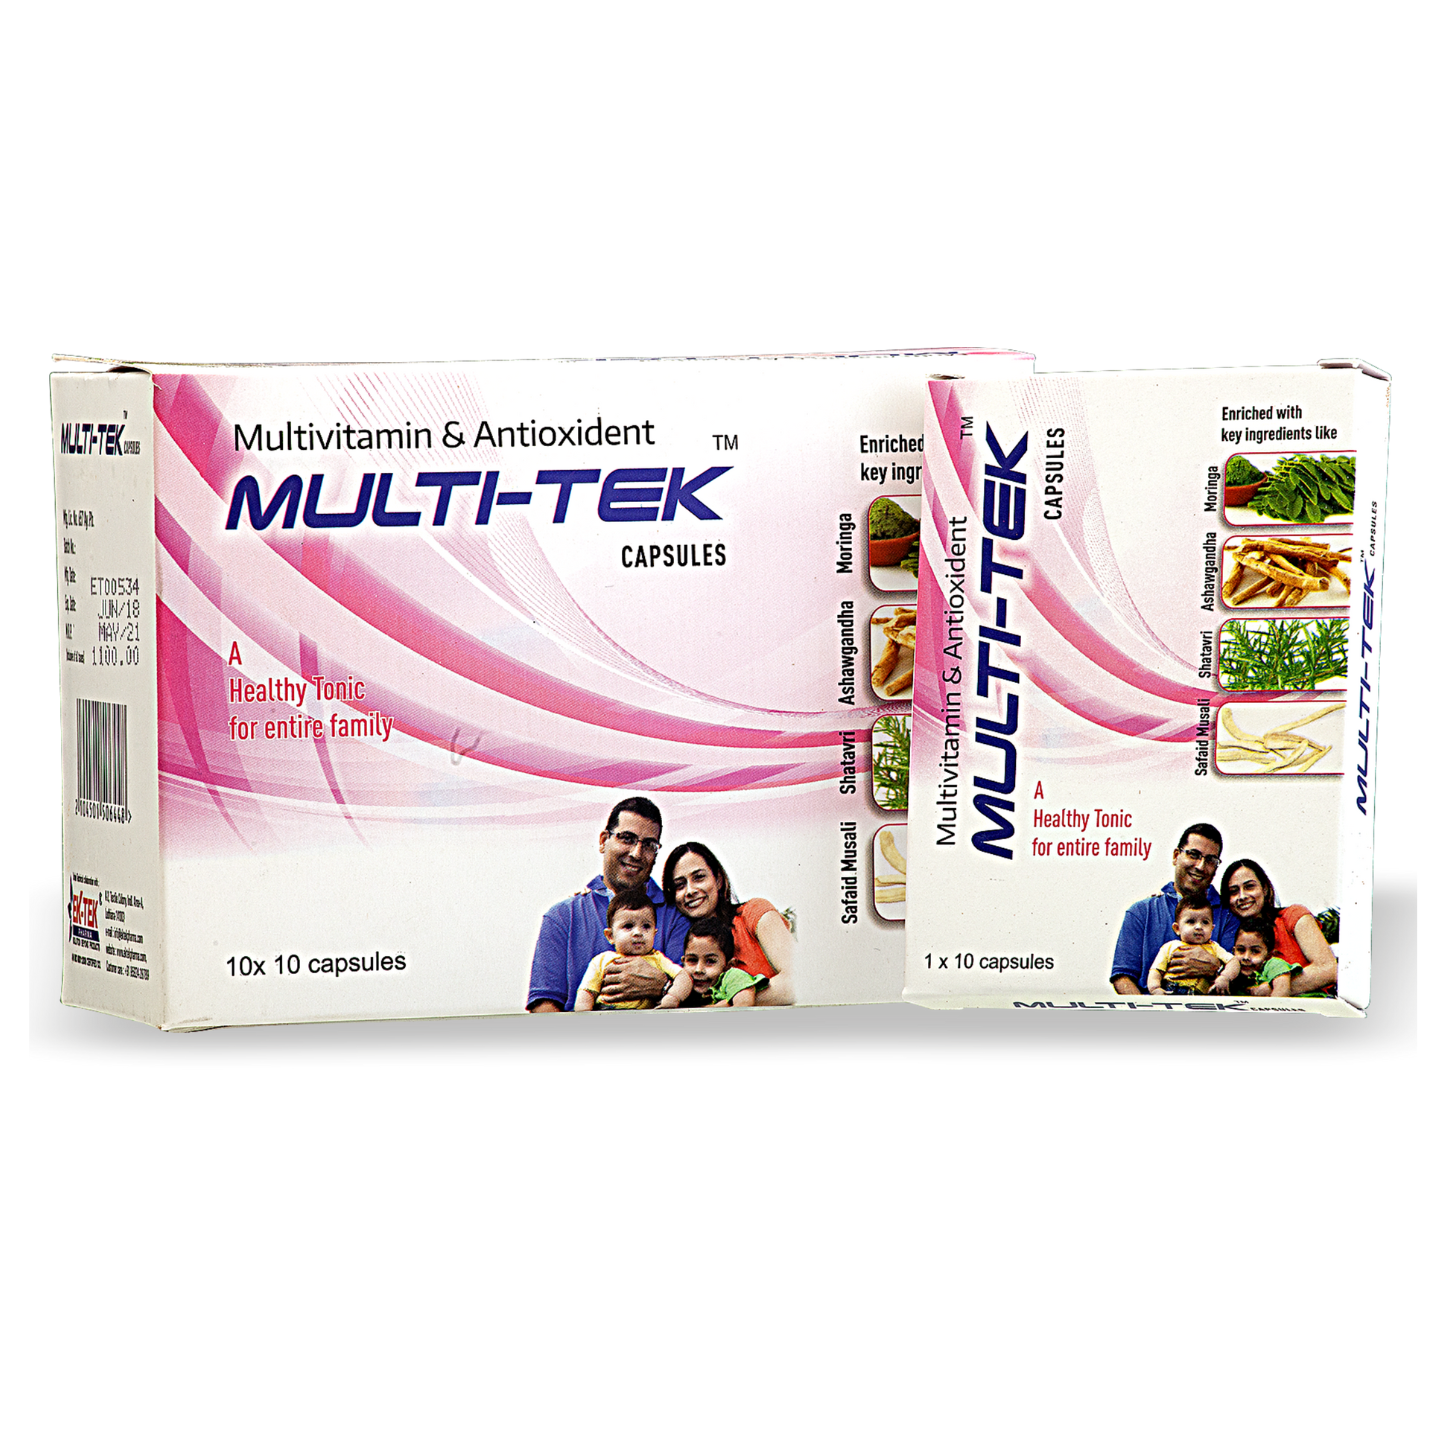 Multi-Tek Capsules & Syrup | Natural Multivitamins | Energy & Vitality | 10x10 | 200ml | Pack of 2 (Syrup)